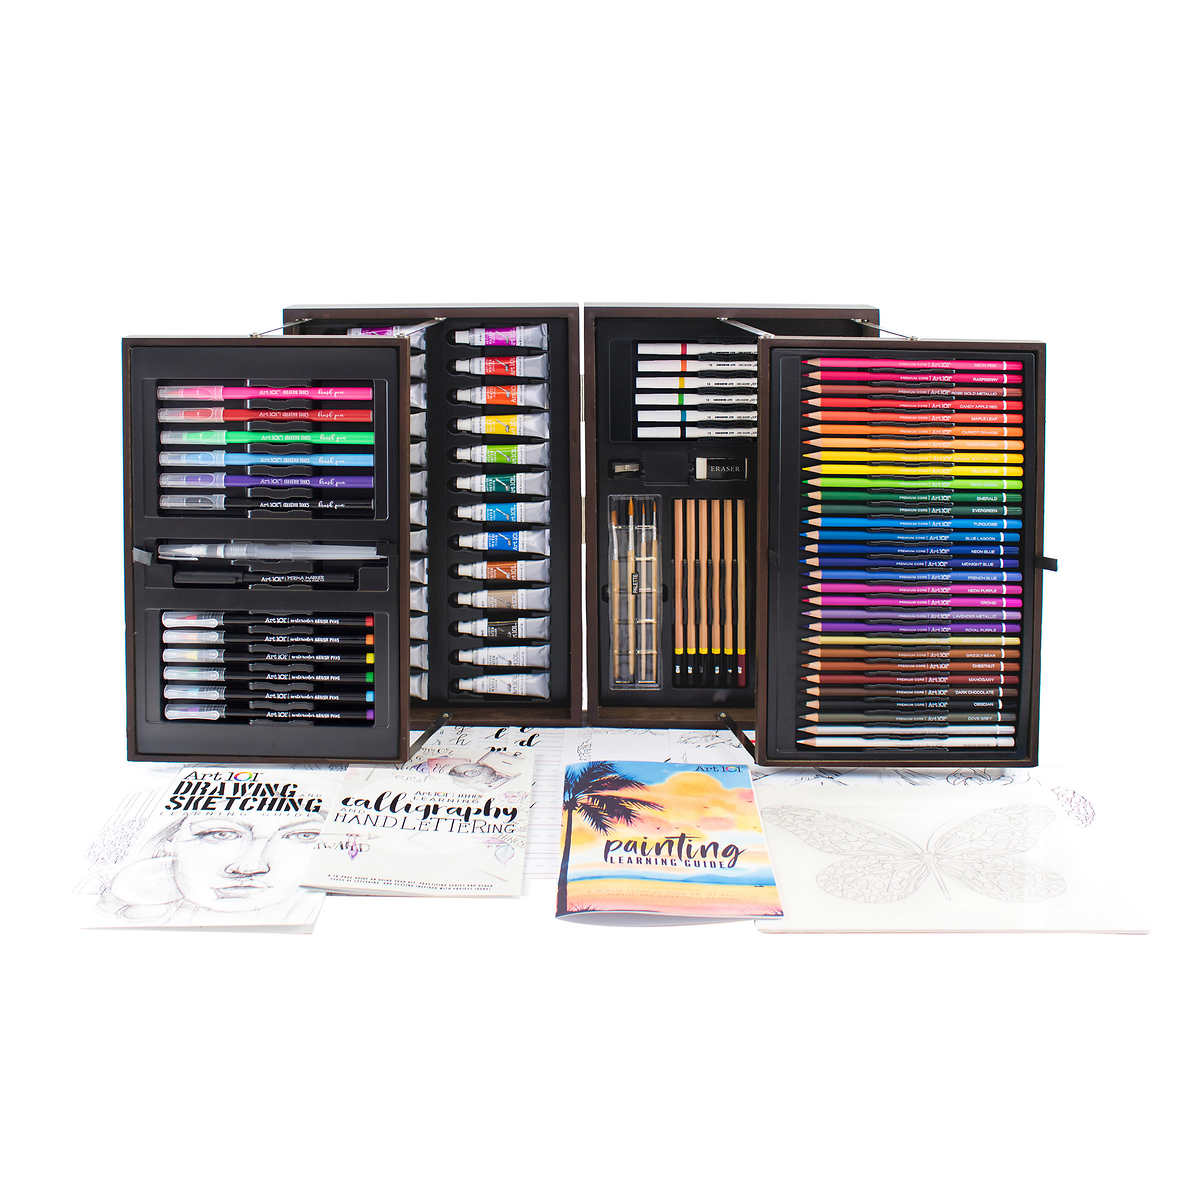 Soft Oil Pastel - 75 Pcs - 1 Set of Tools from Apollo Box